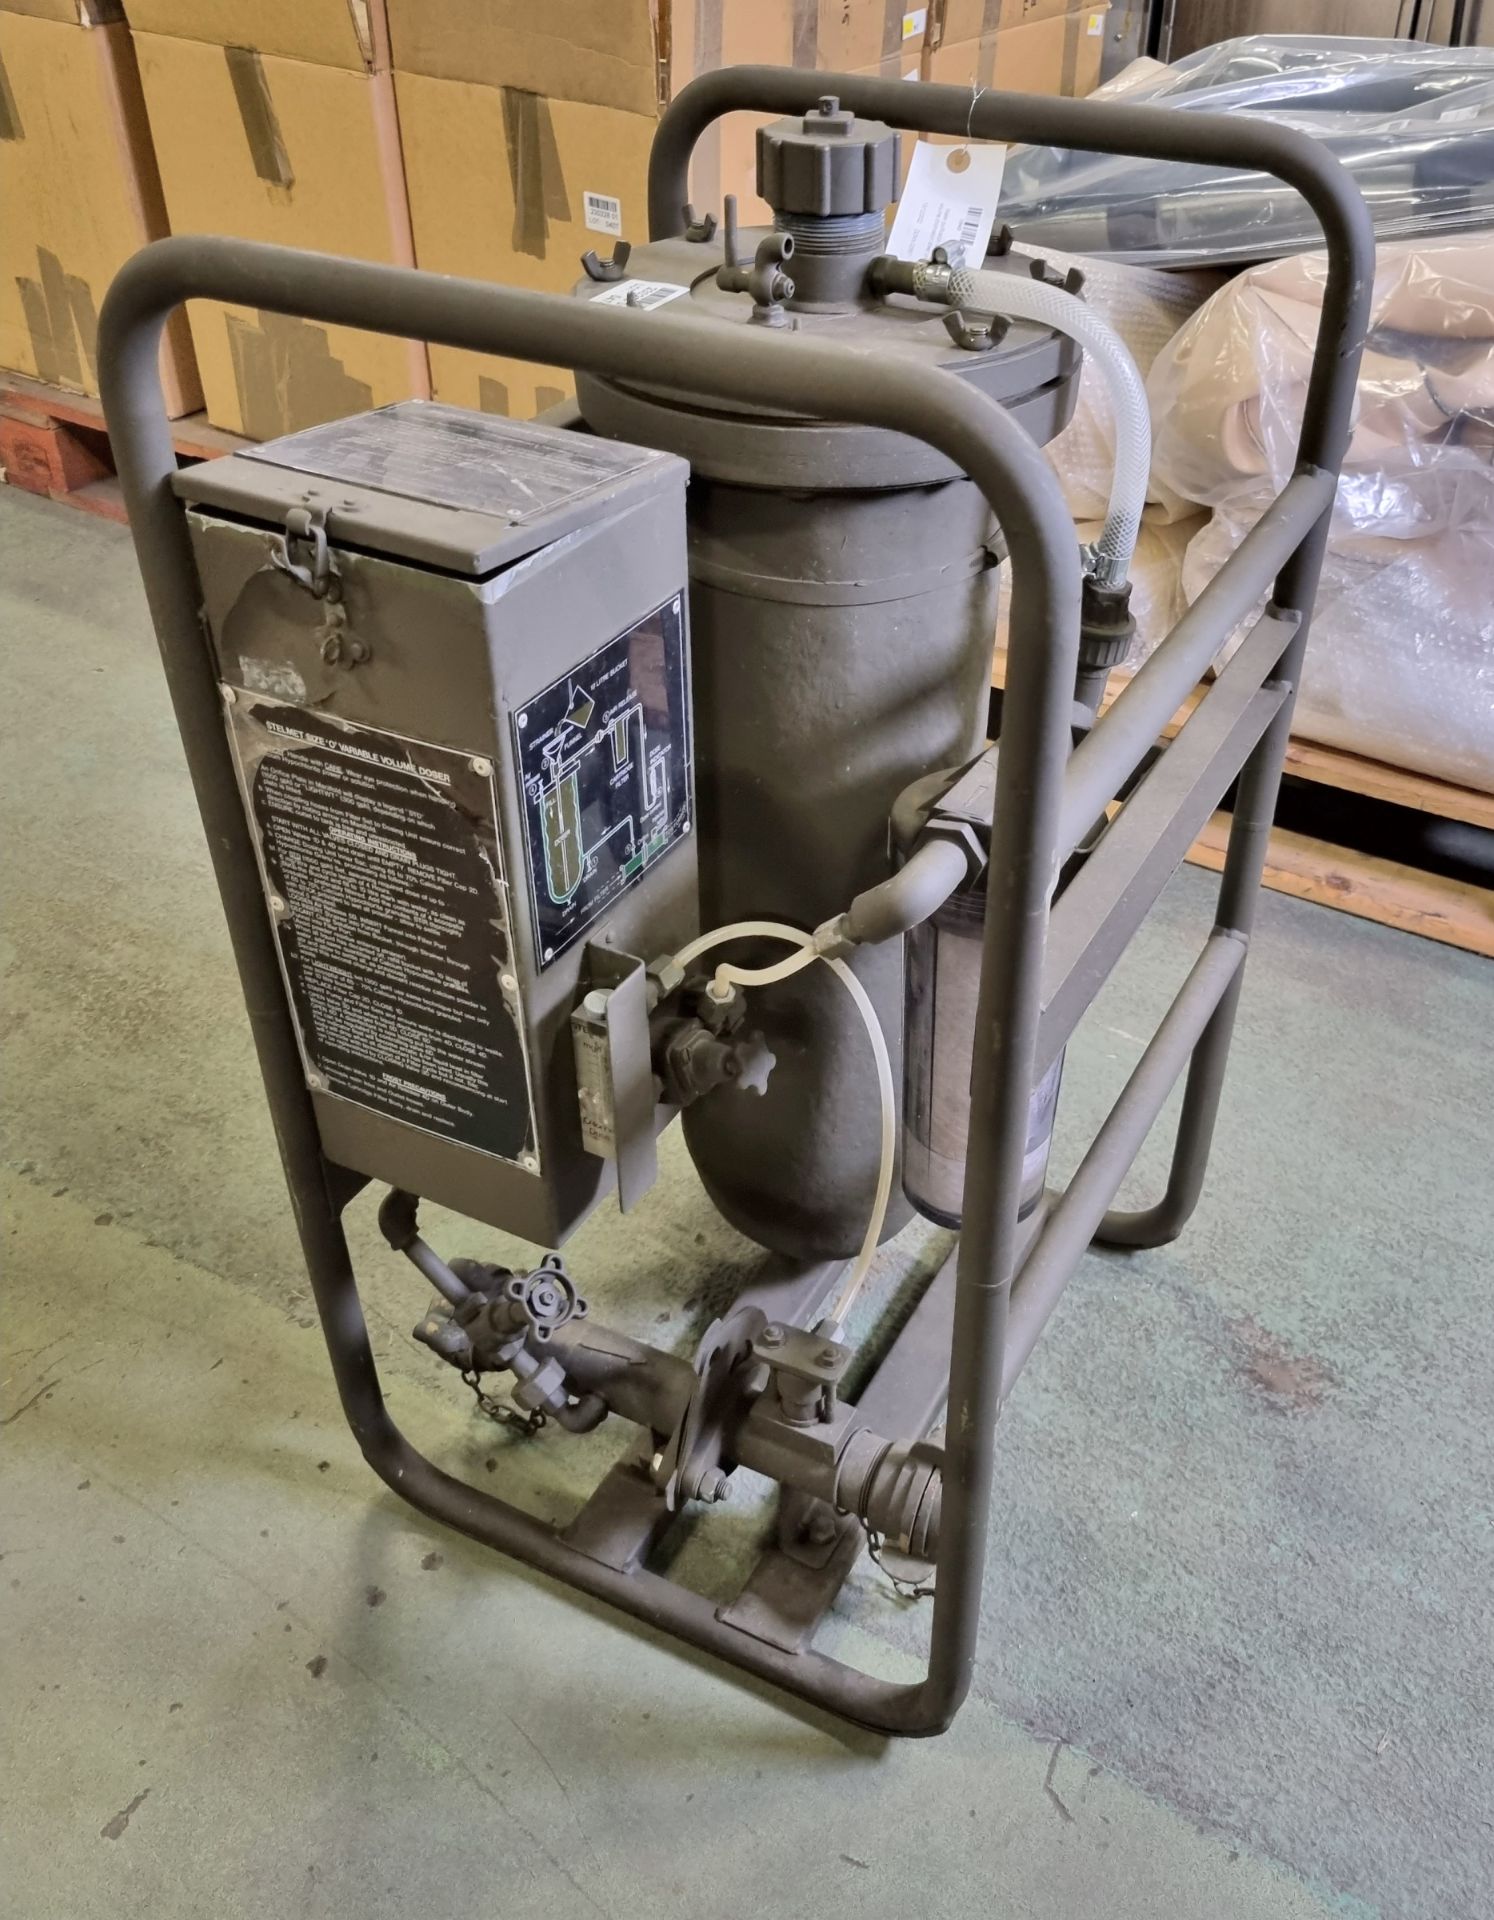 Water purification variable volume chlorination doser unit - Image 3 of 5